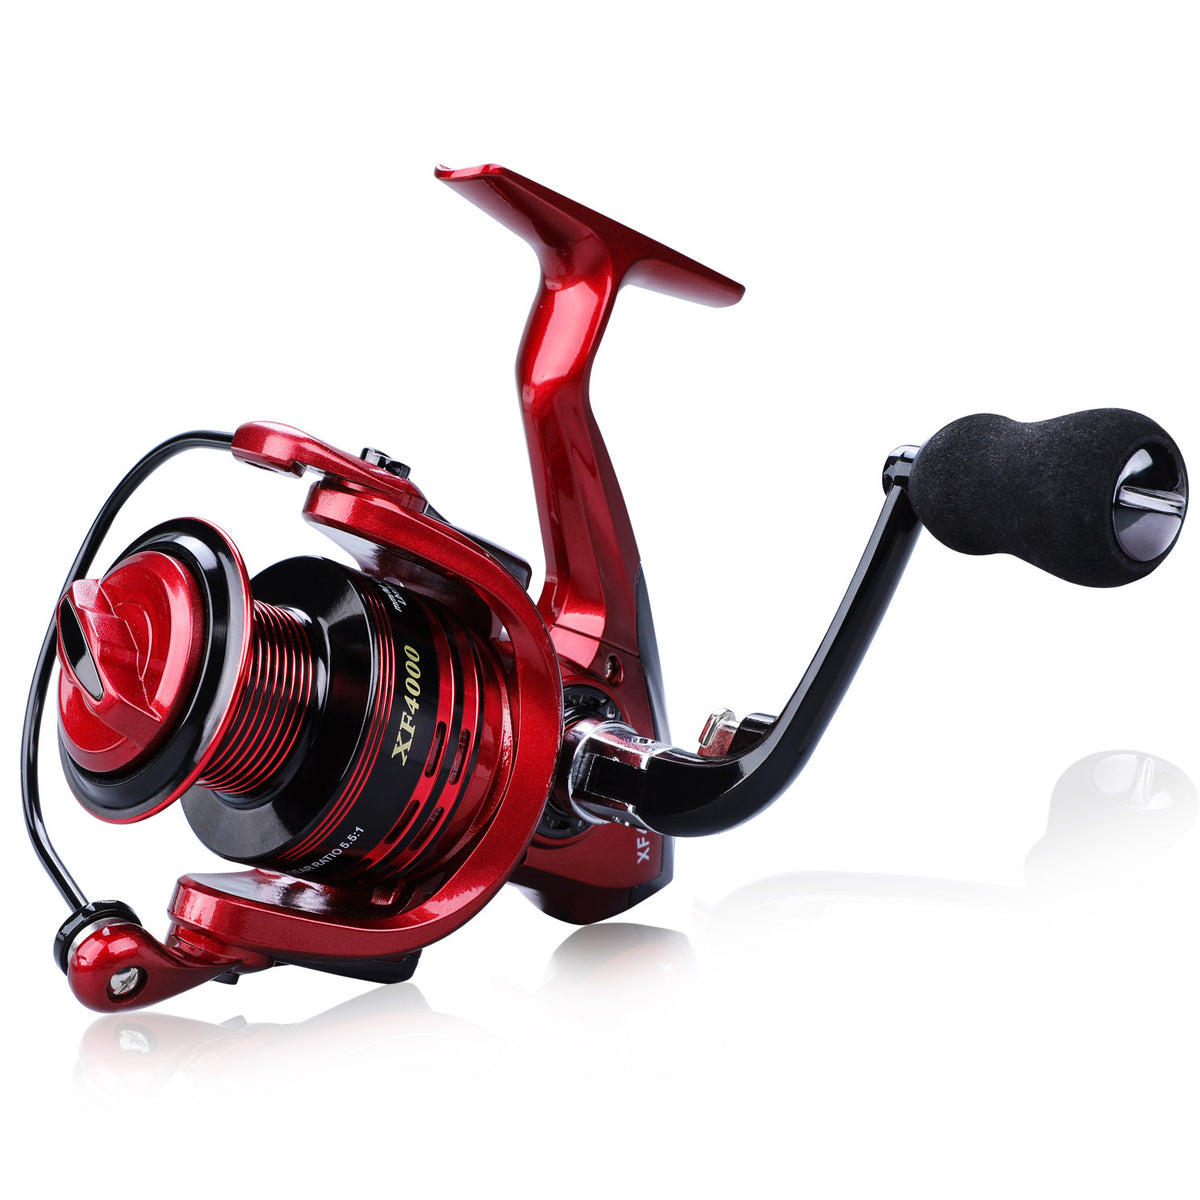 KUXY Spinning Reels Ultra-Light Smooth Fishing Reel Tackle 5000